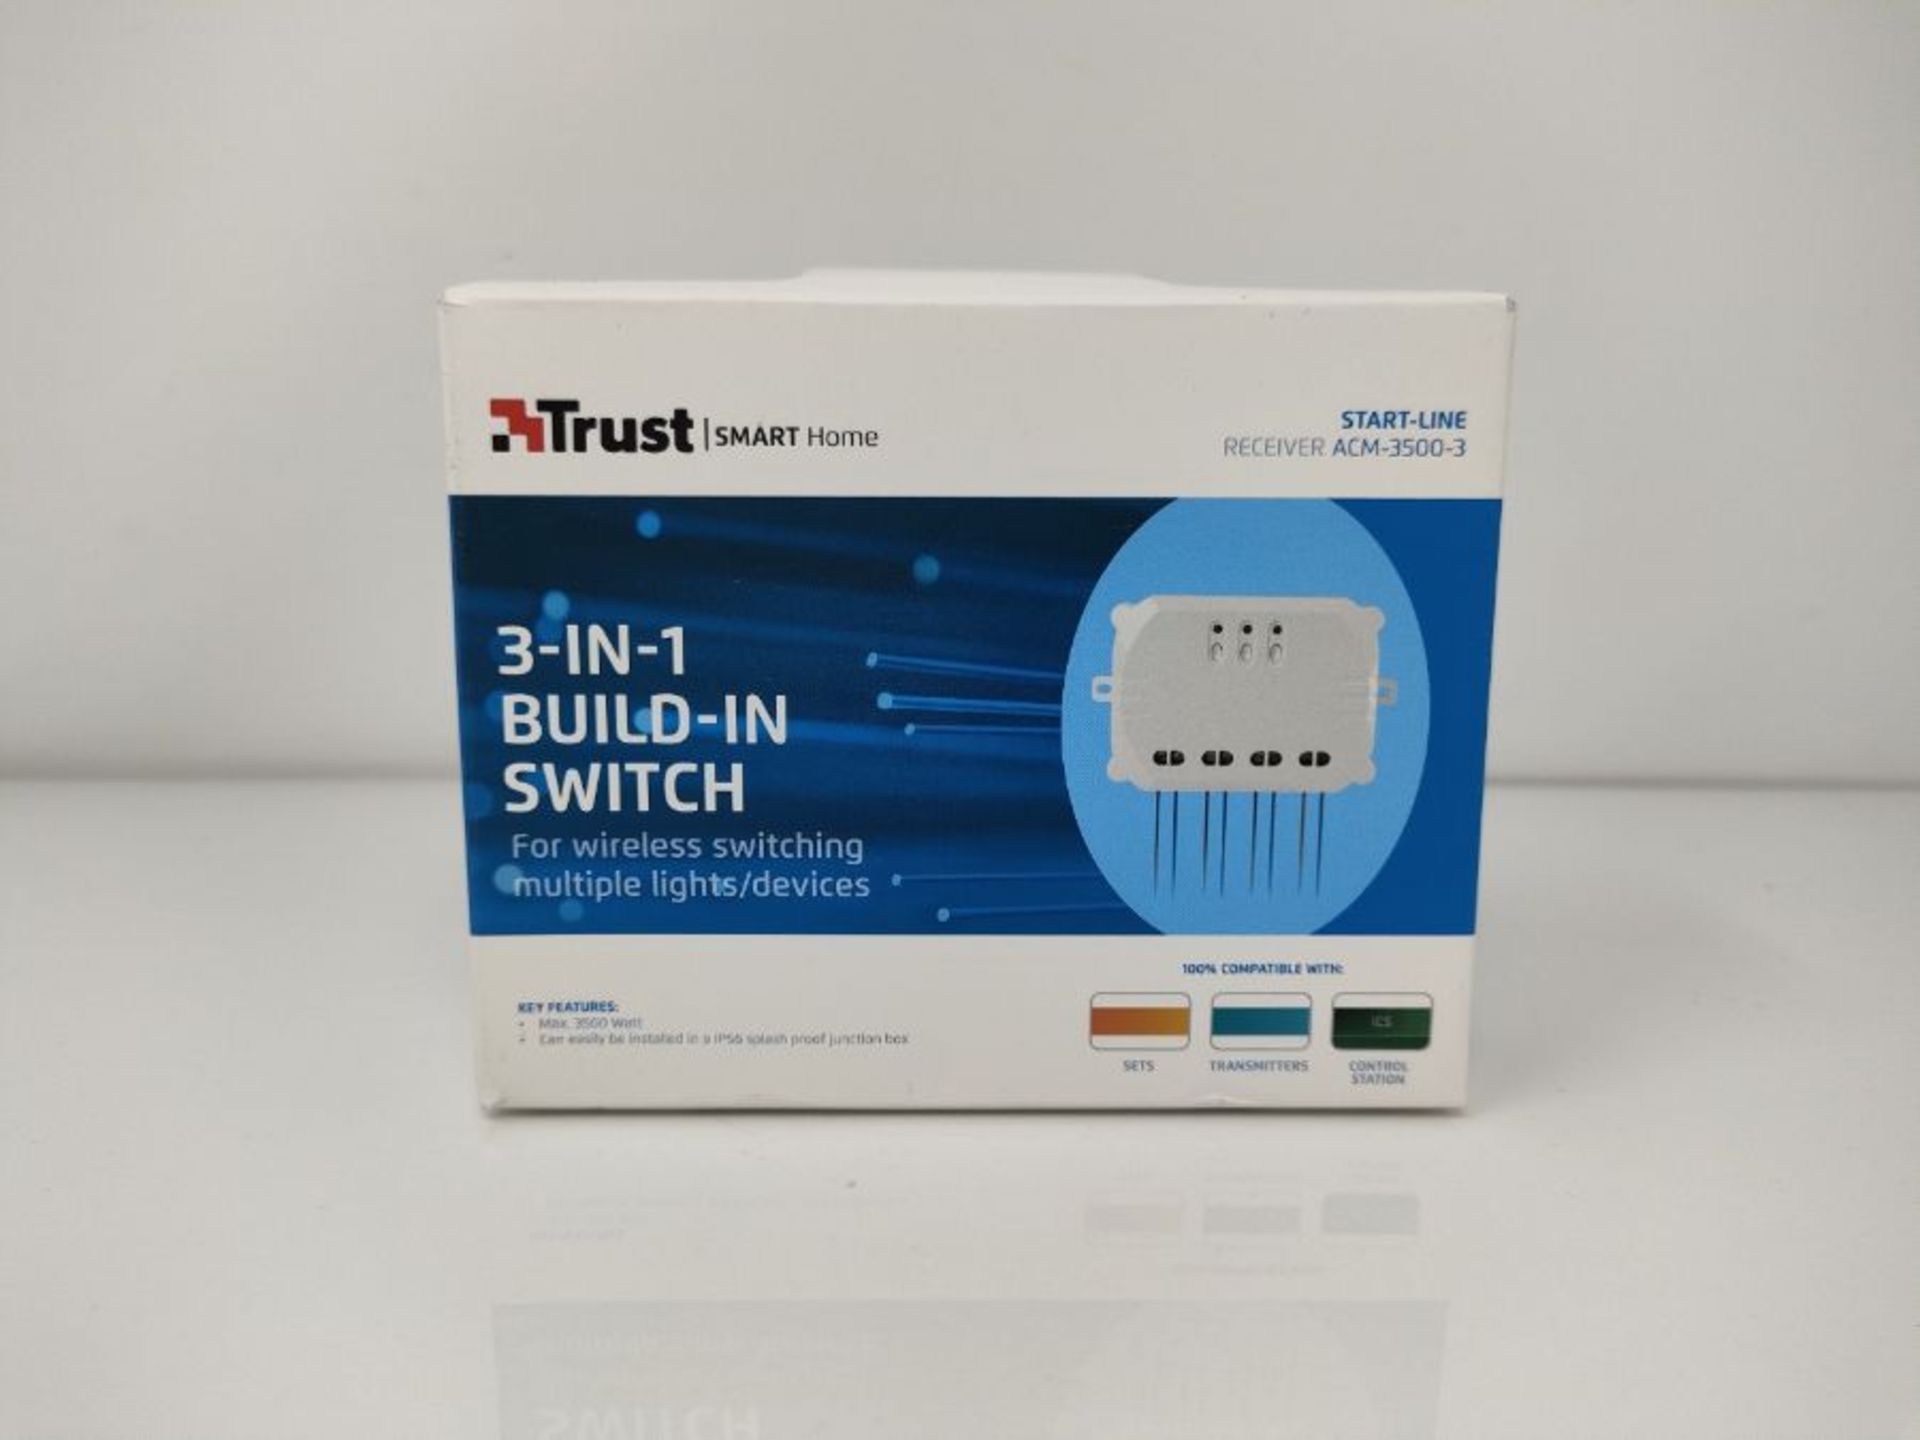 Trust Smart Home ACM-3500-3 Built-In 3-in-1 Switch for Wireless Light Switching - Image 2 of 3